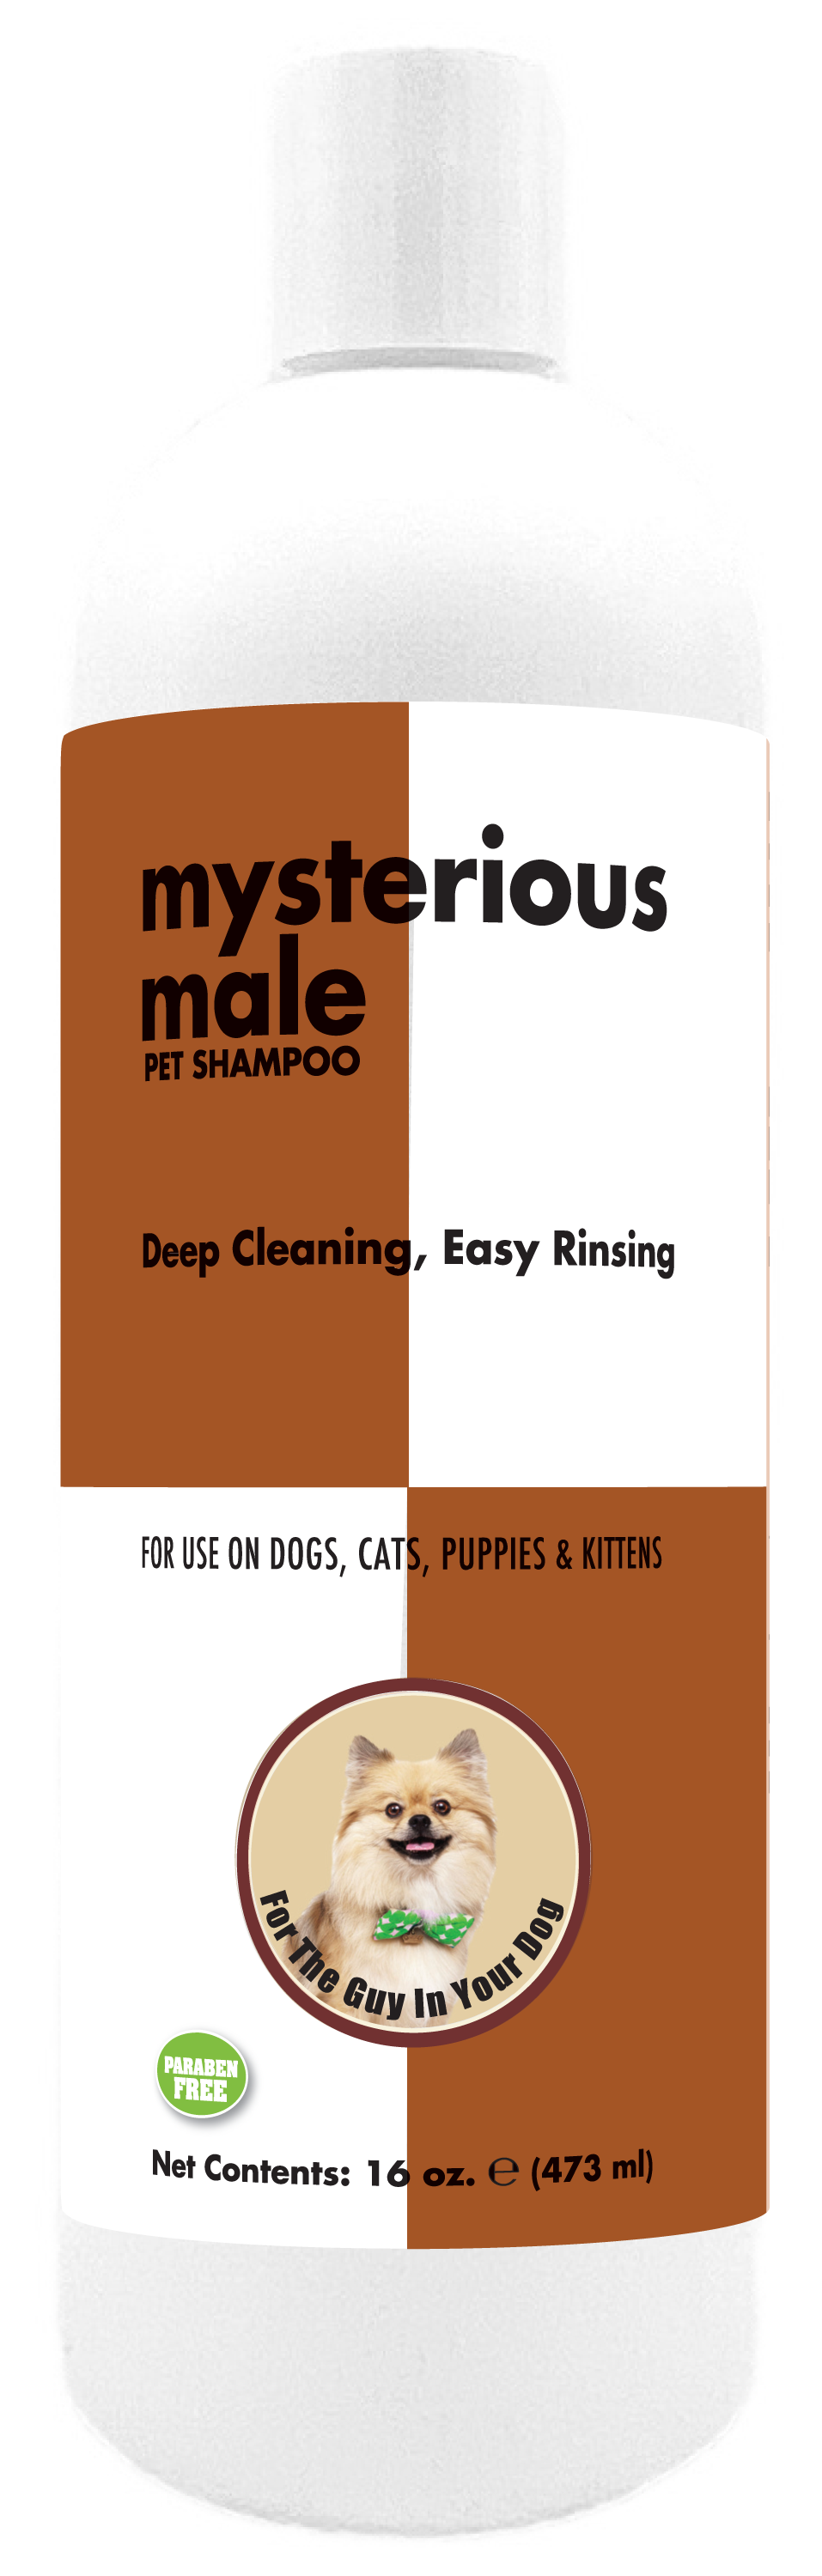 Soap Scents for Men Story - 3 Boys and a Dog